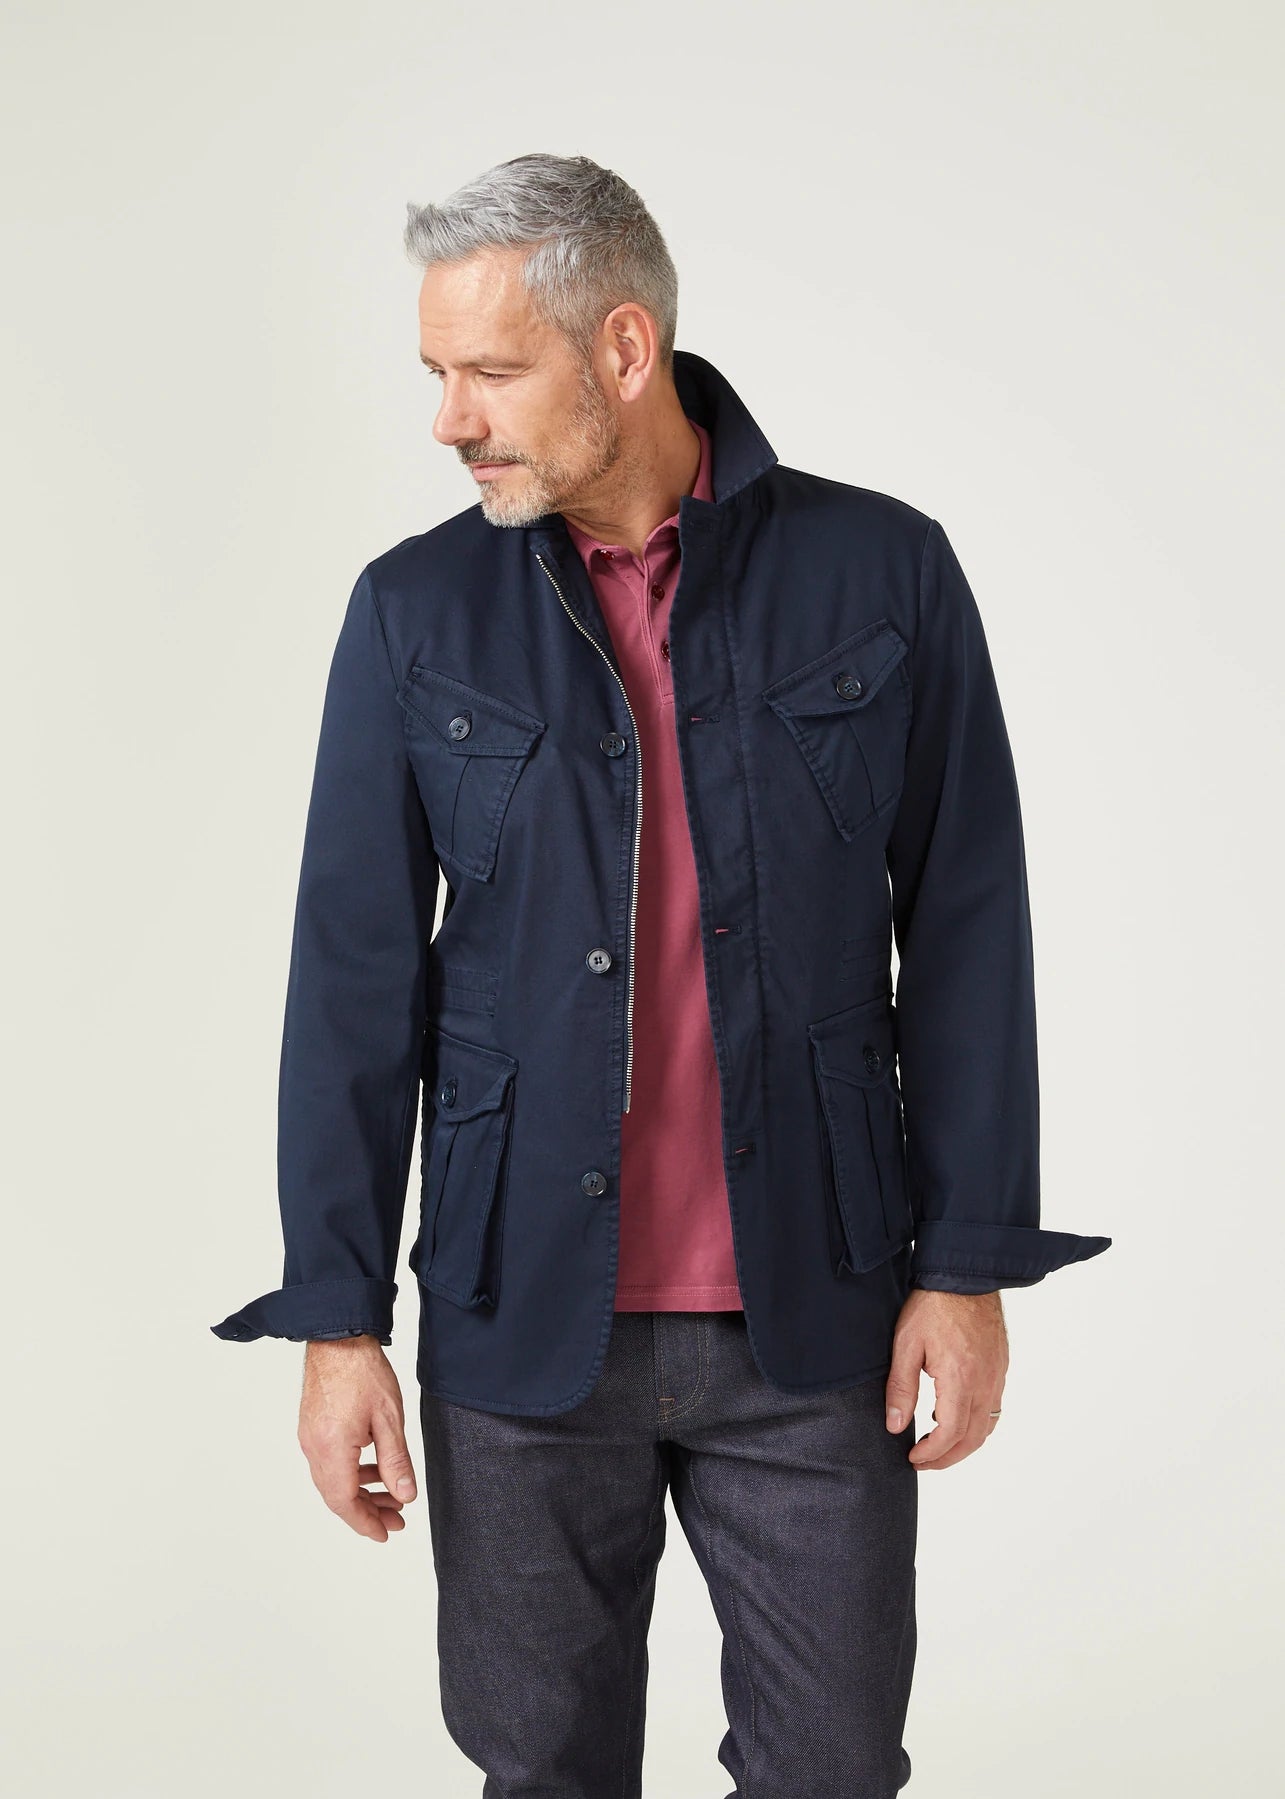 Casual American Jacket for Men Parkstone